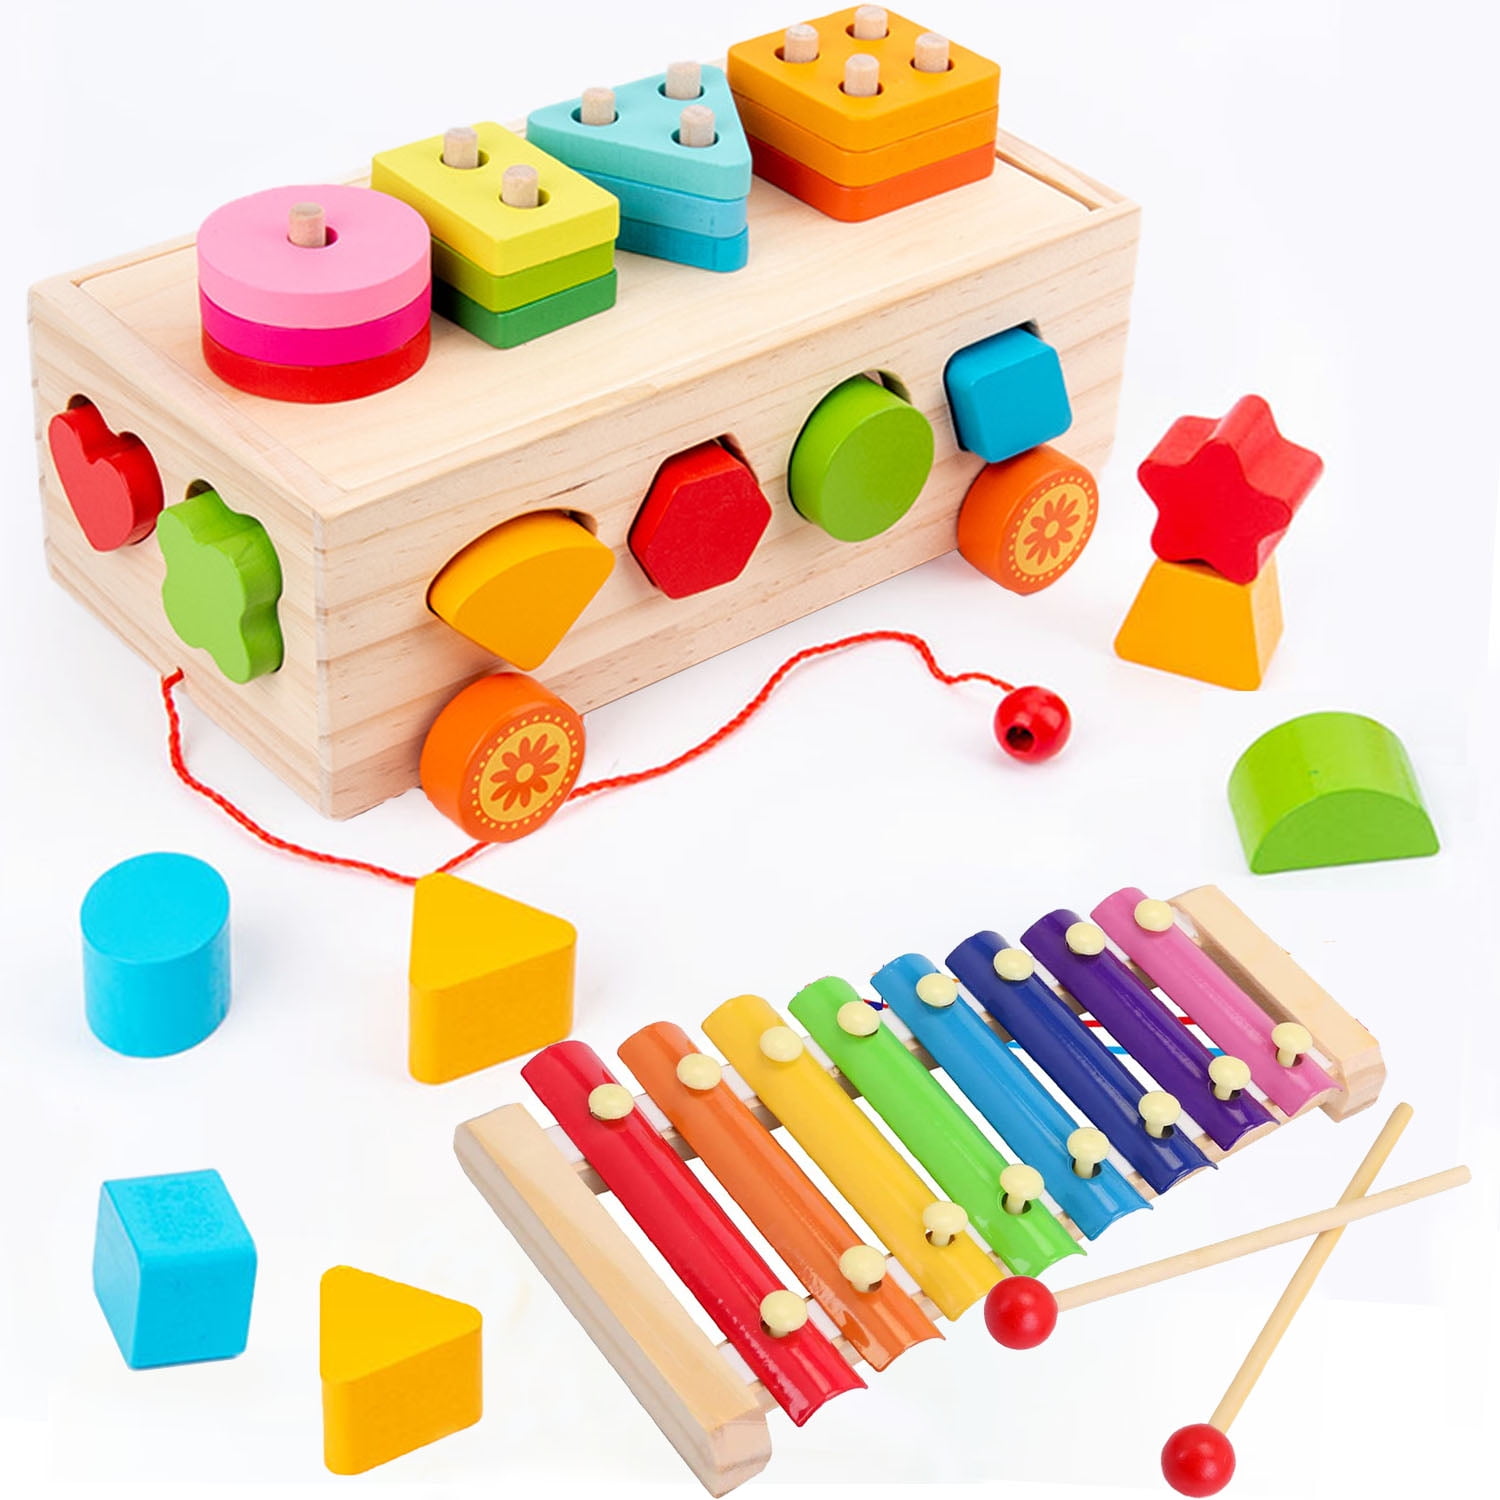 Wooden Shape & Color Sorting Toy with Storage Box, 25 Non-Toxic Geometric  Blocks, Montessori Toy Preschool Educational Learning Toy Gifts for 1 2 3